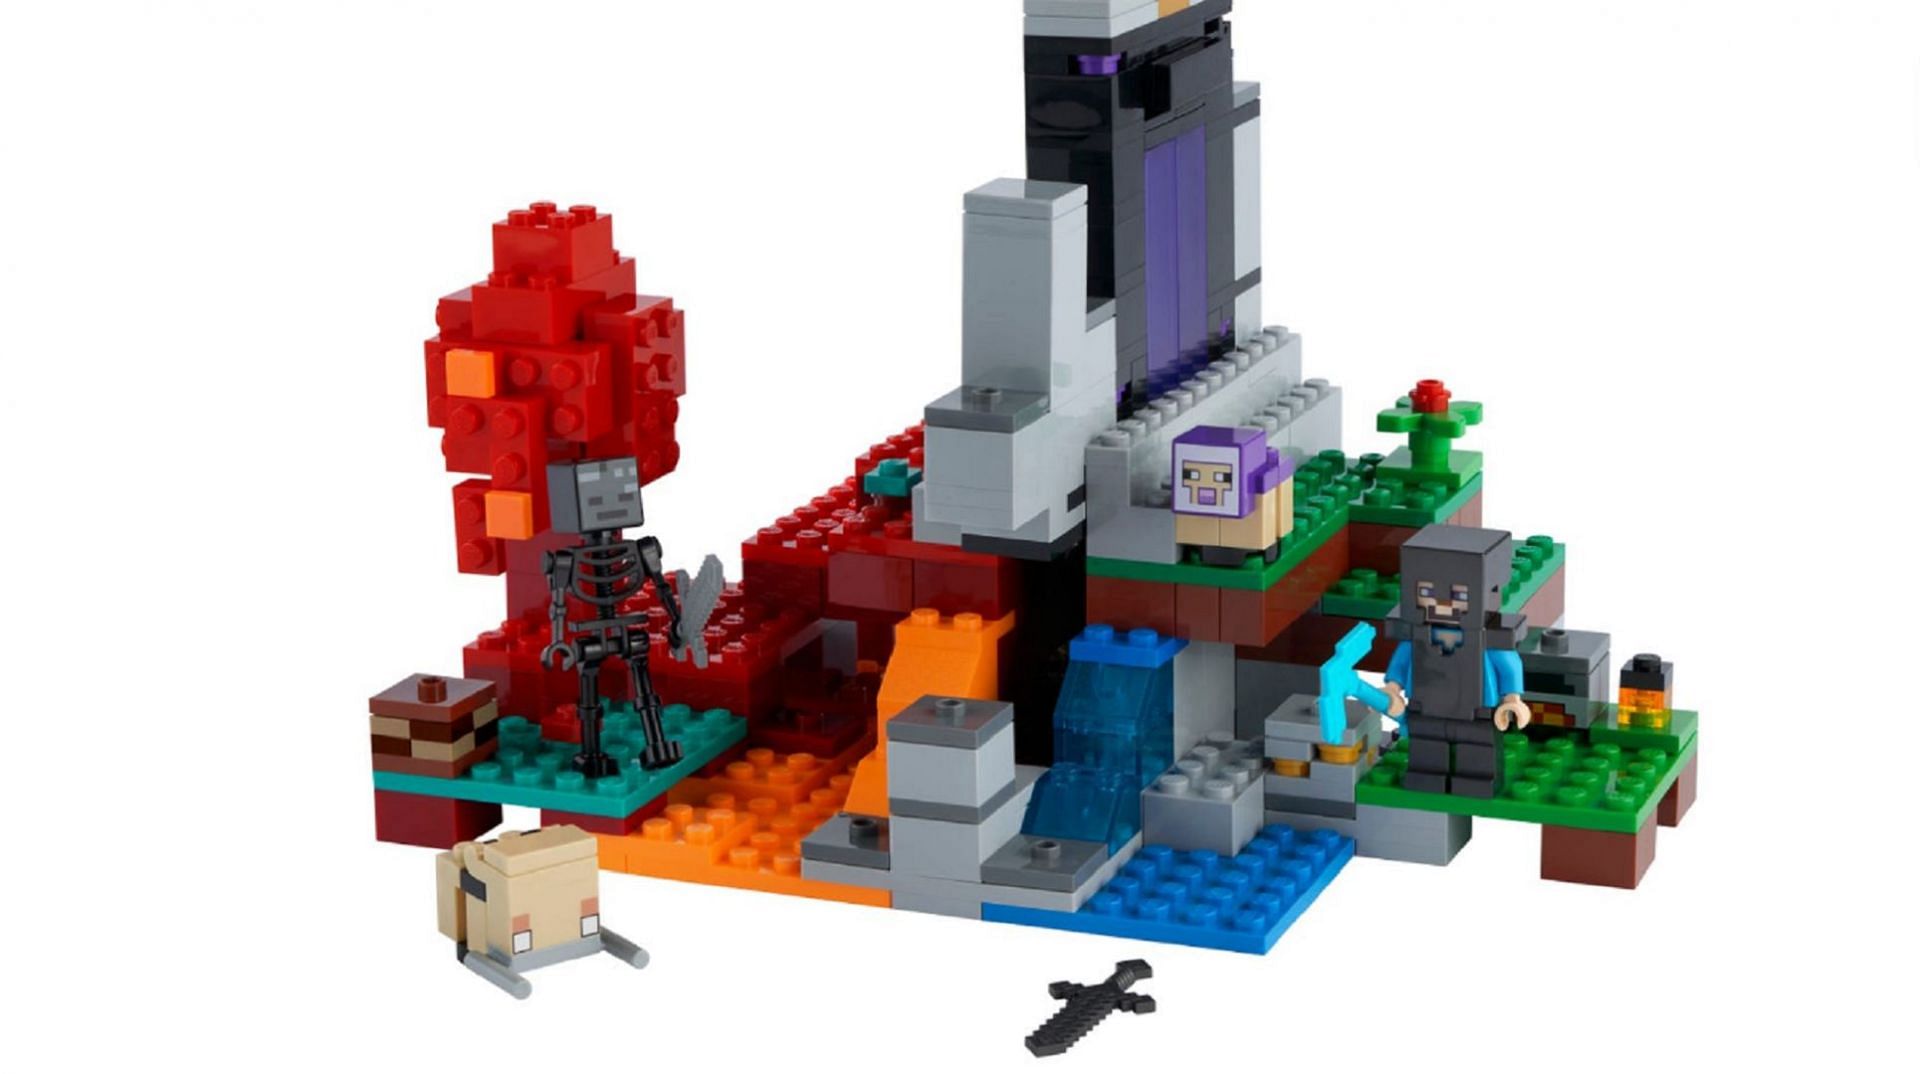 The harrowing portal to the Nether can now be constructed in Lego! (Image via Mojang/Lego)